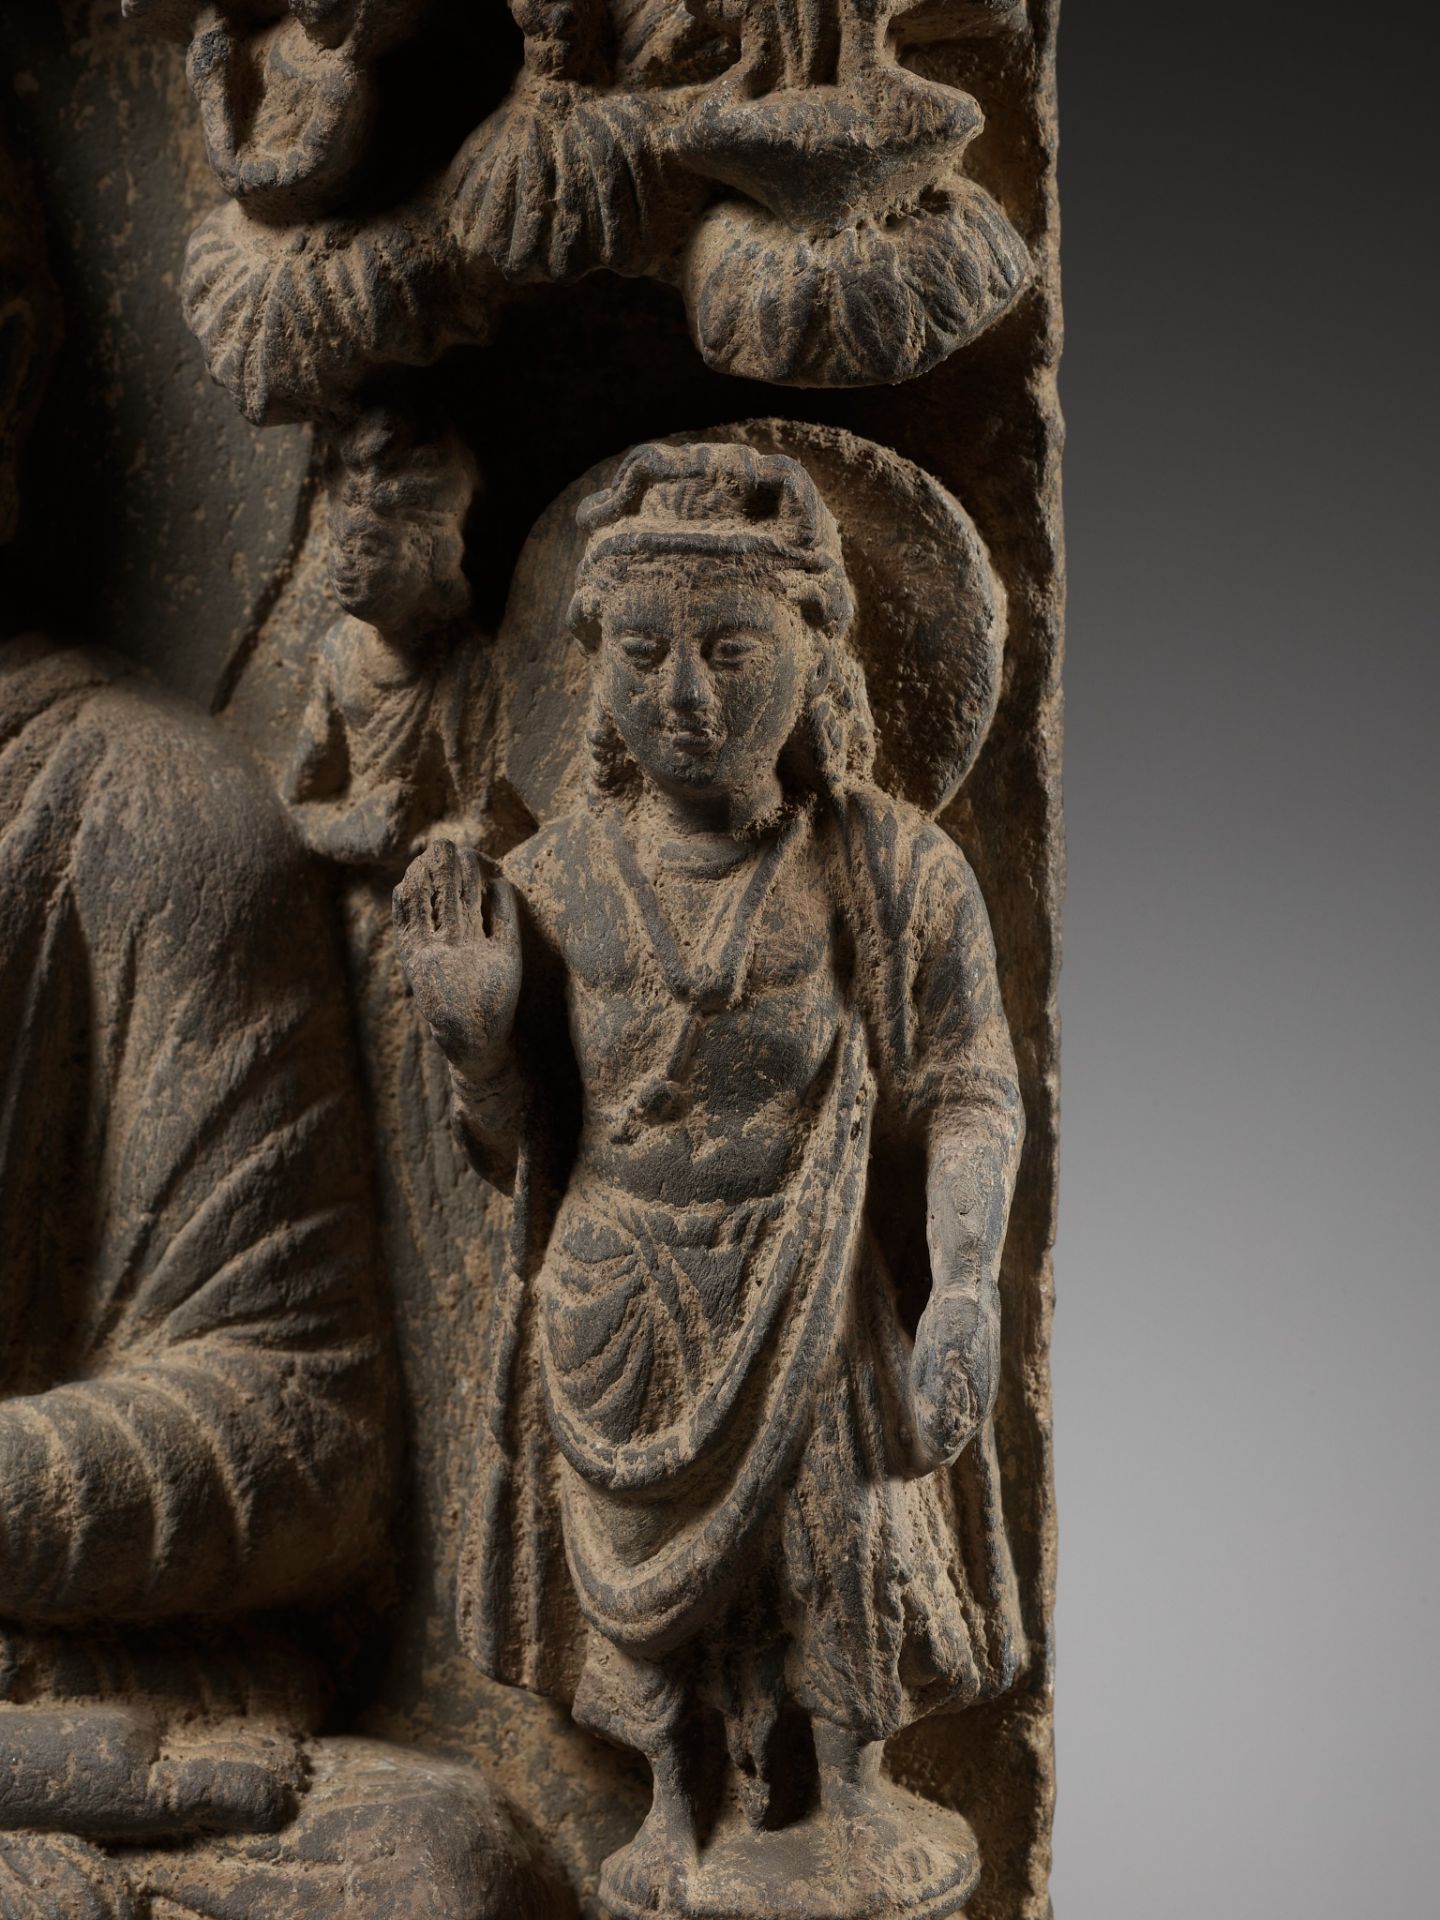 A SCHIST STELE DEPICTING BUDDHA, ANCIENT REGION OF GANDHARA, 3RD-4TH CENTURY - Image 8 of 11